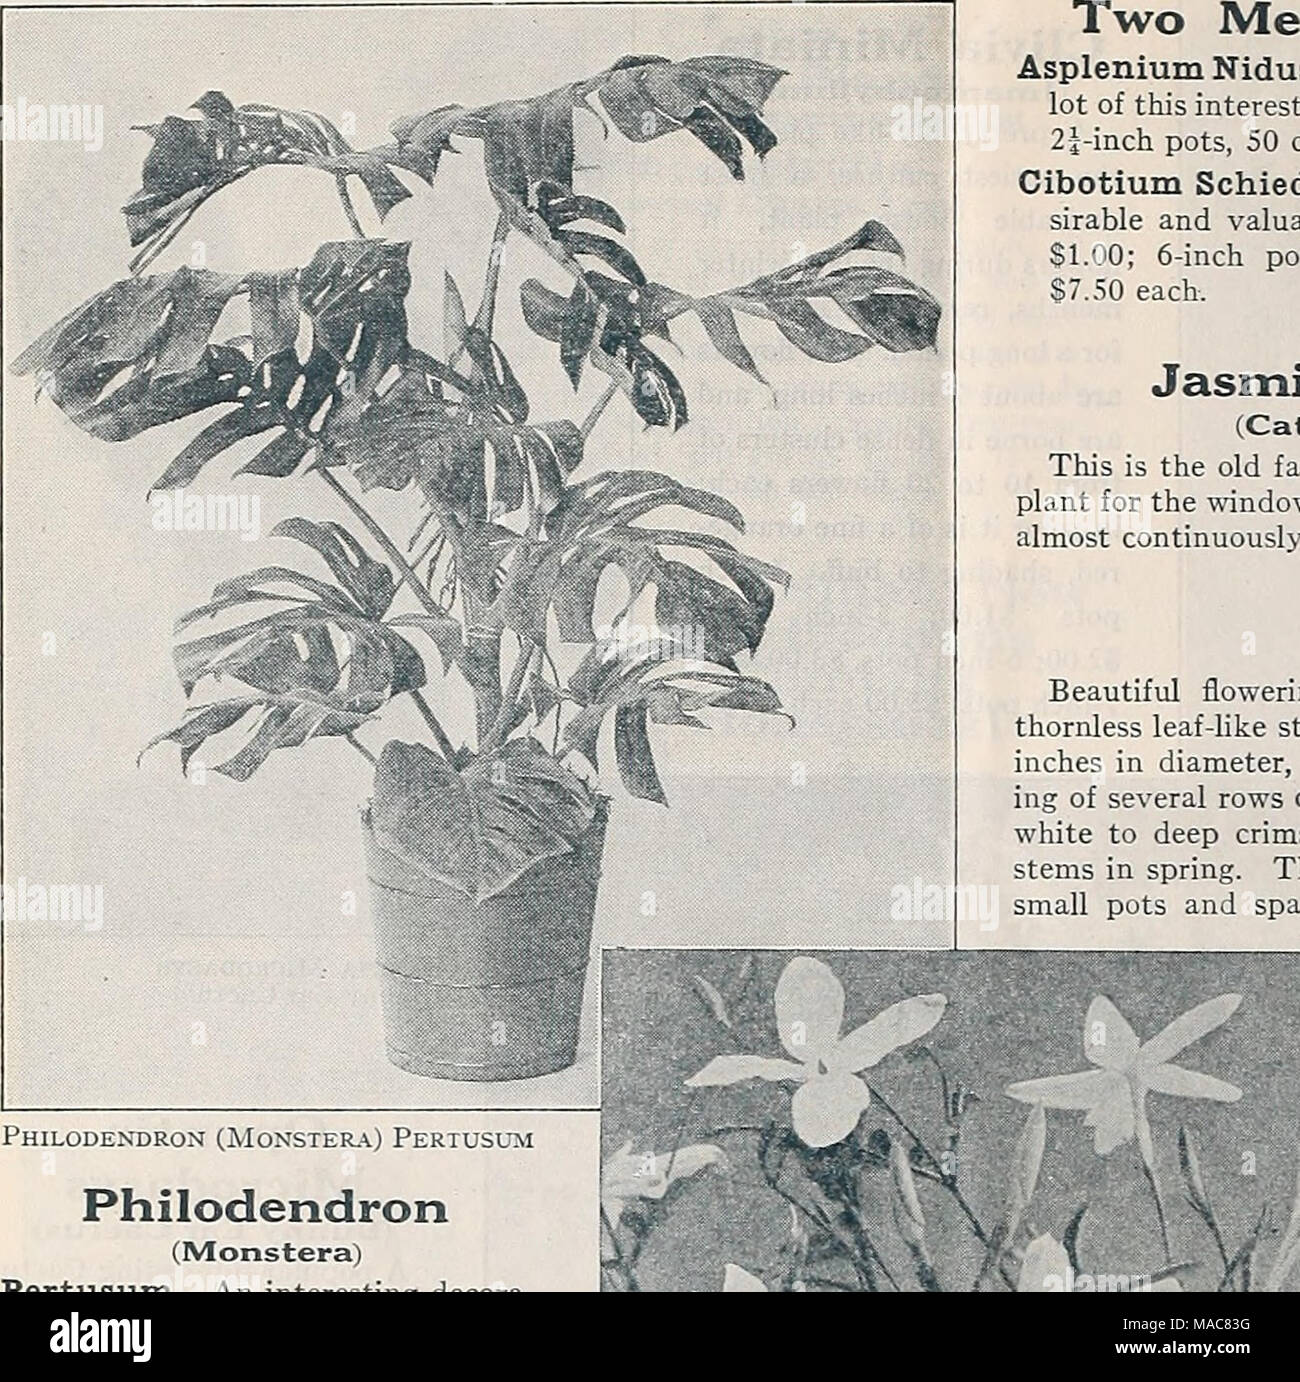 . Dreer's midsummer list 1933 . Philodendron (Monstera) Pertusum. An interesting decora- tive foliage plant for the con- servatory or living room with large fleshy dark green leaves that are irregularly and deeply cut or lobed on the edges. We offer this only in specimen plants. 7-inch tubs, $10.00; 8-inch tubs, $15.00 each. ^^^ 1^ Two Meritorious House Ferns Asplenium Nidus Avis {Bird's Nest Fern). We have a splendid lot of this interesting Fern which is well suited for house culture. 2i-inch pots, 50 cts.; Sf-inch pots, 75 cts. each. Cibotium Schiedei {Mexican Tree Fern). One of the most de- Stock Photo